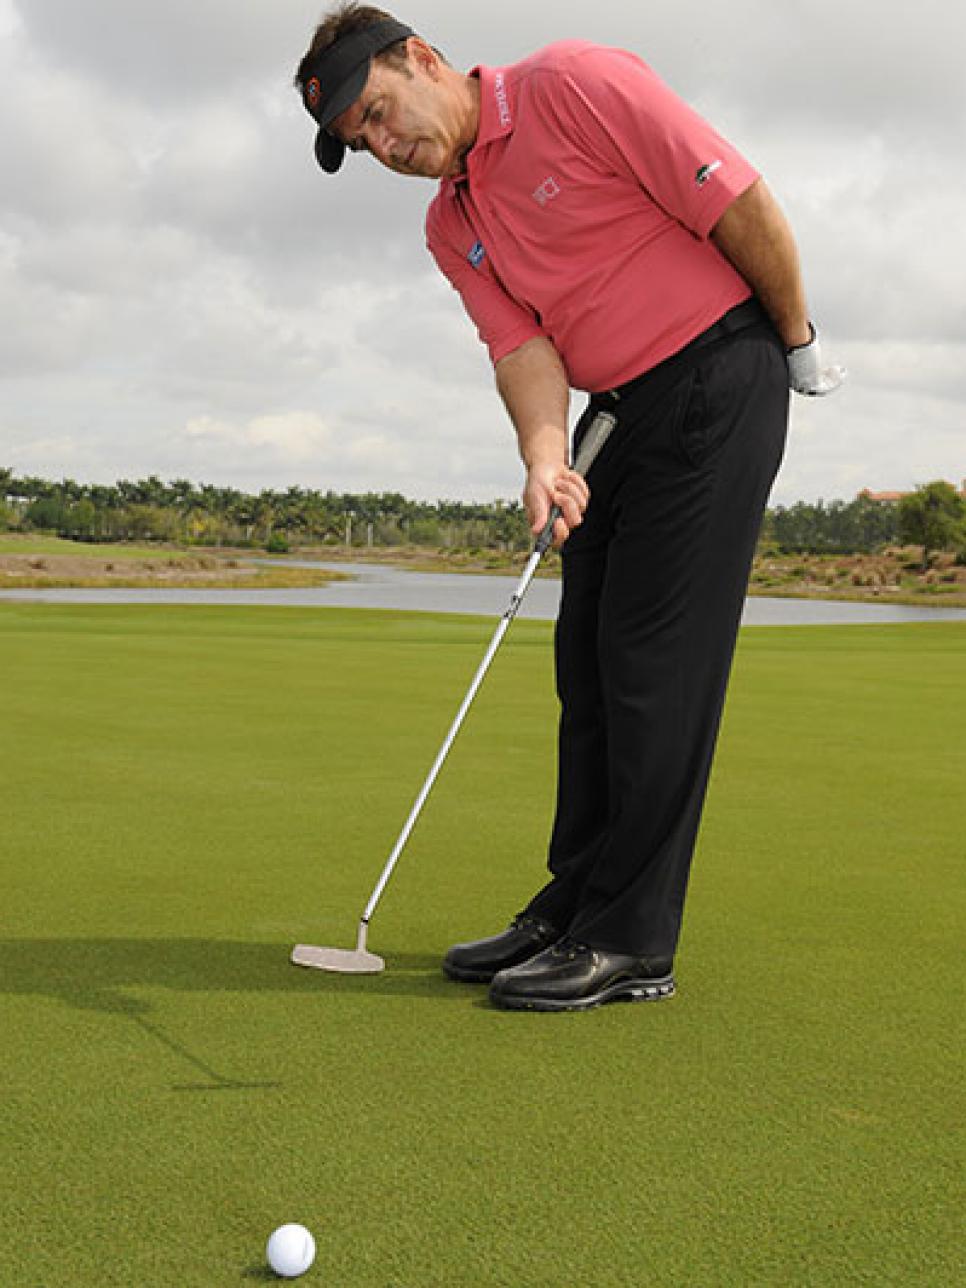 Putt with your right arm only on the practice green